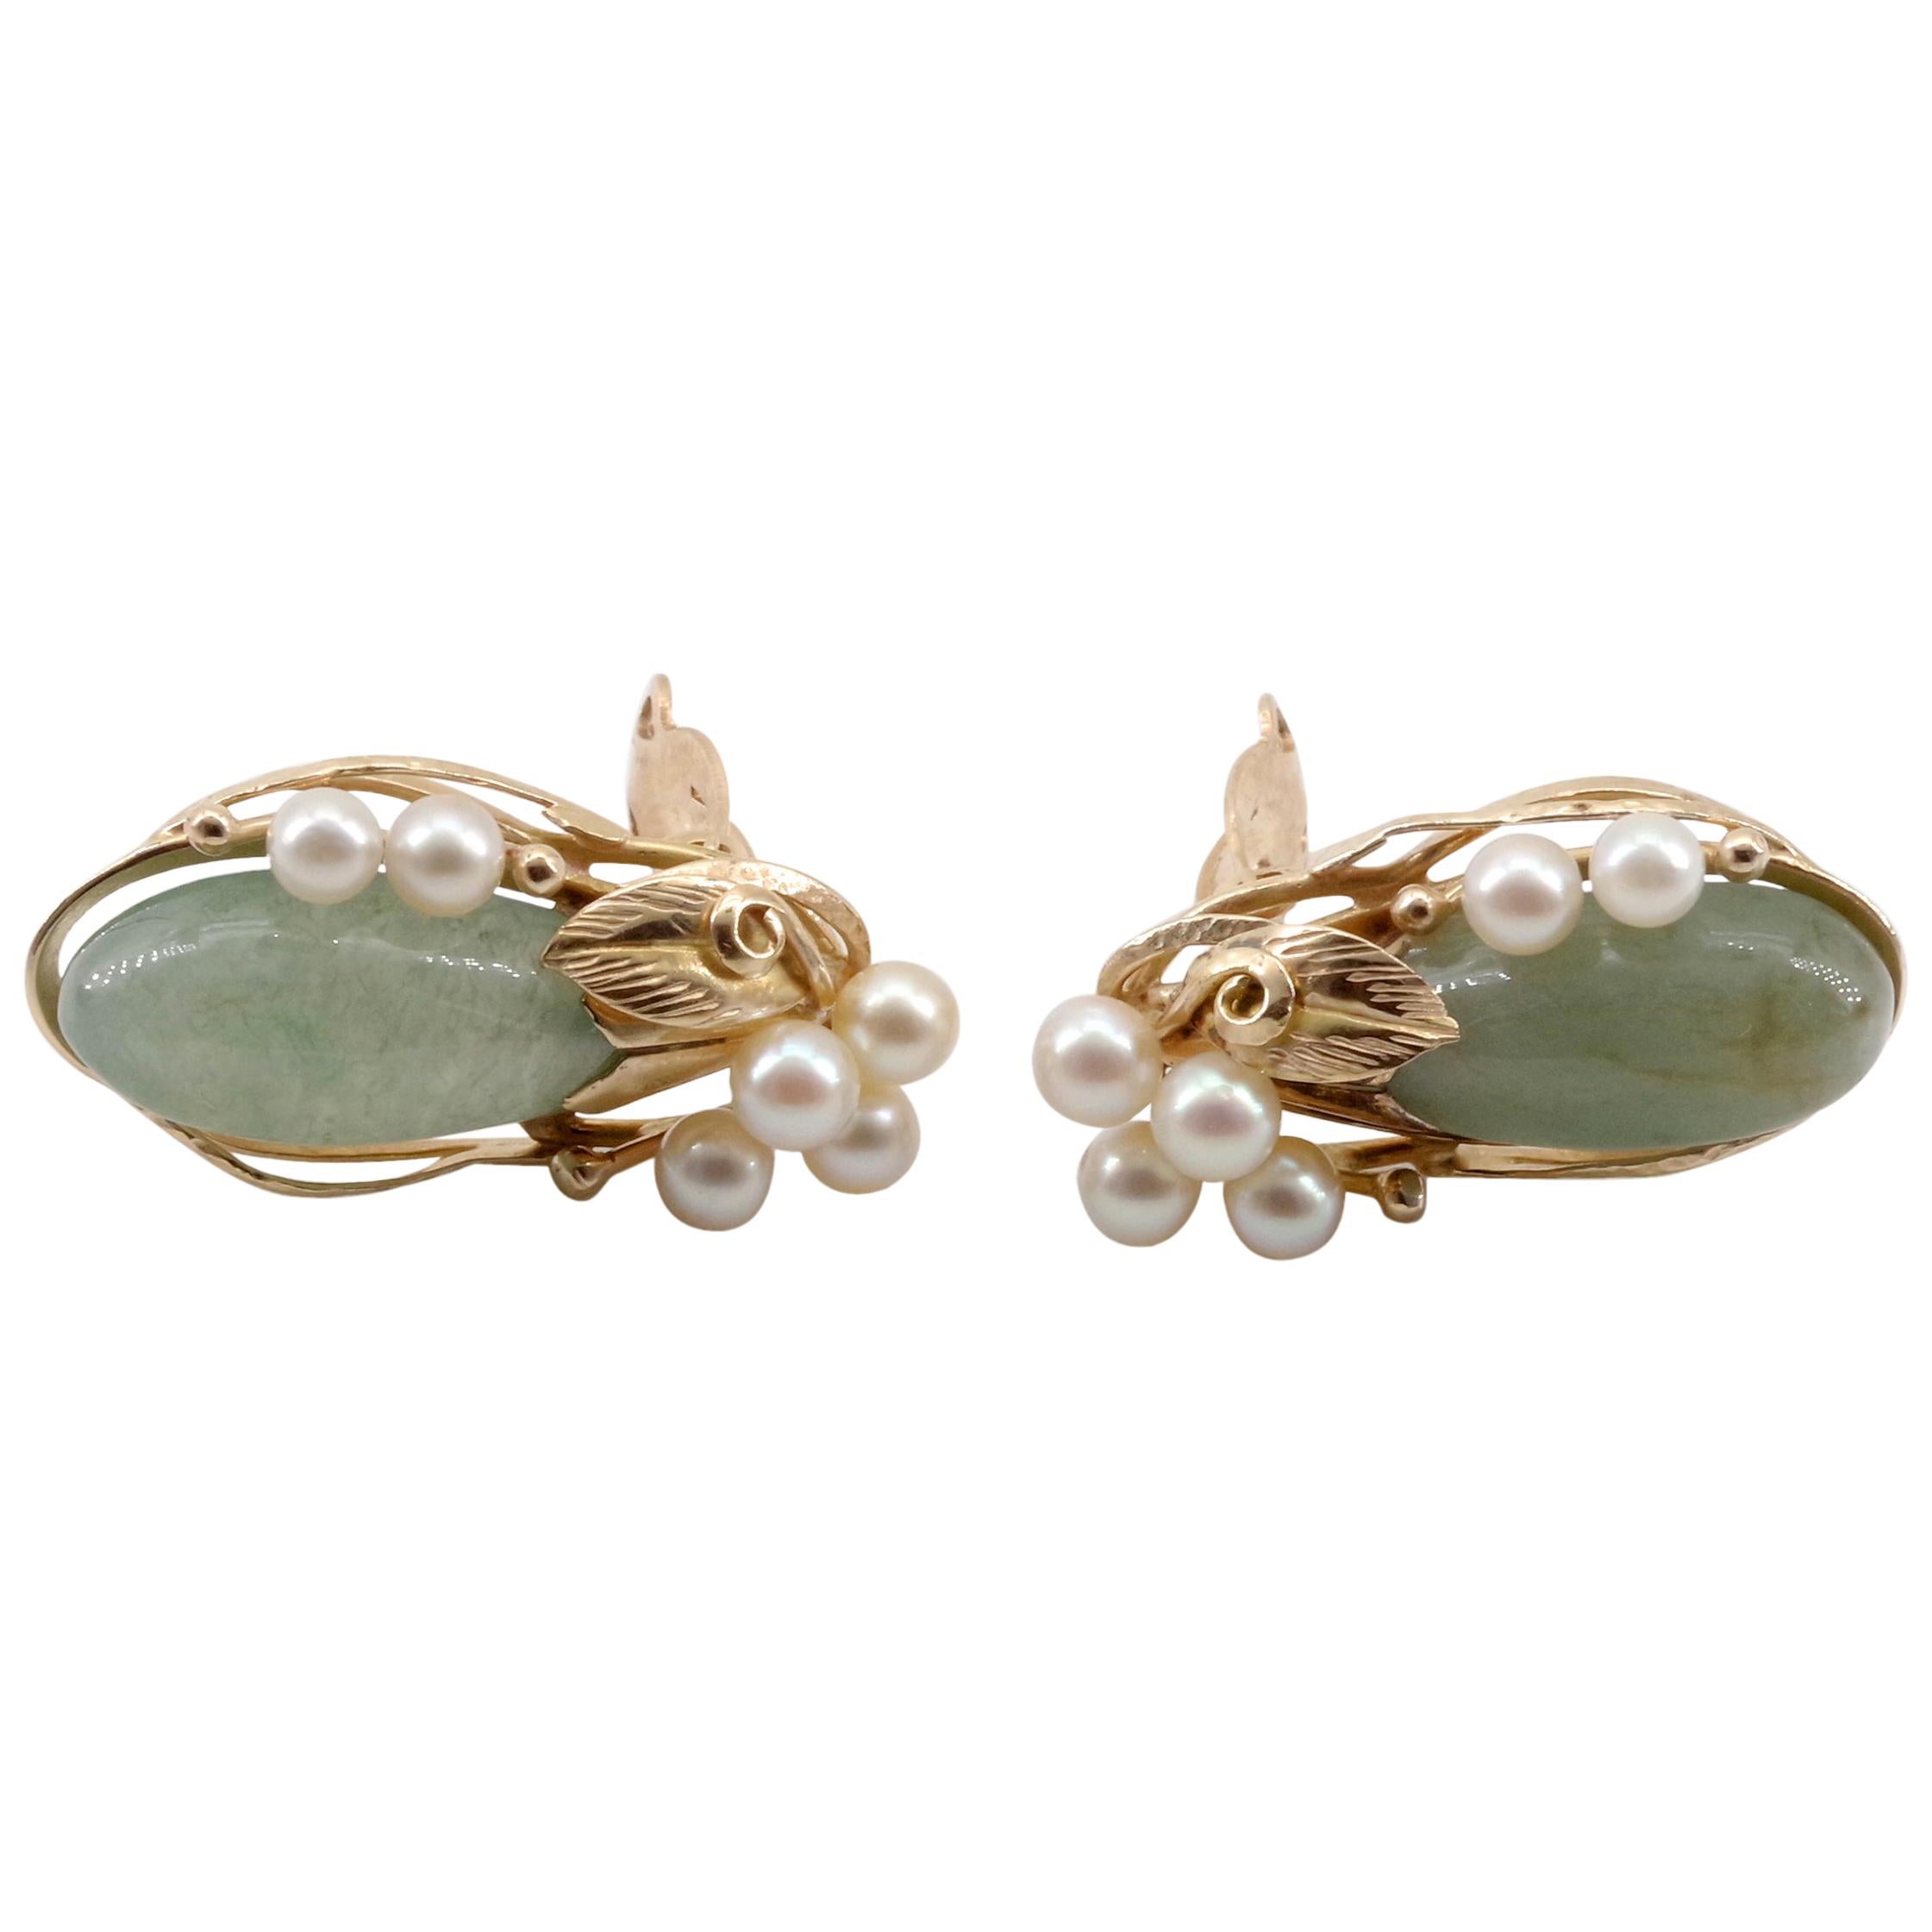 Jade and Pearl Earrings from Ming's Hawaii